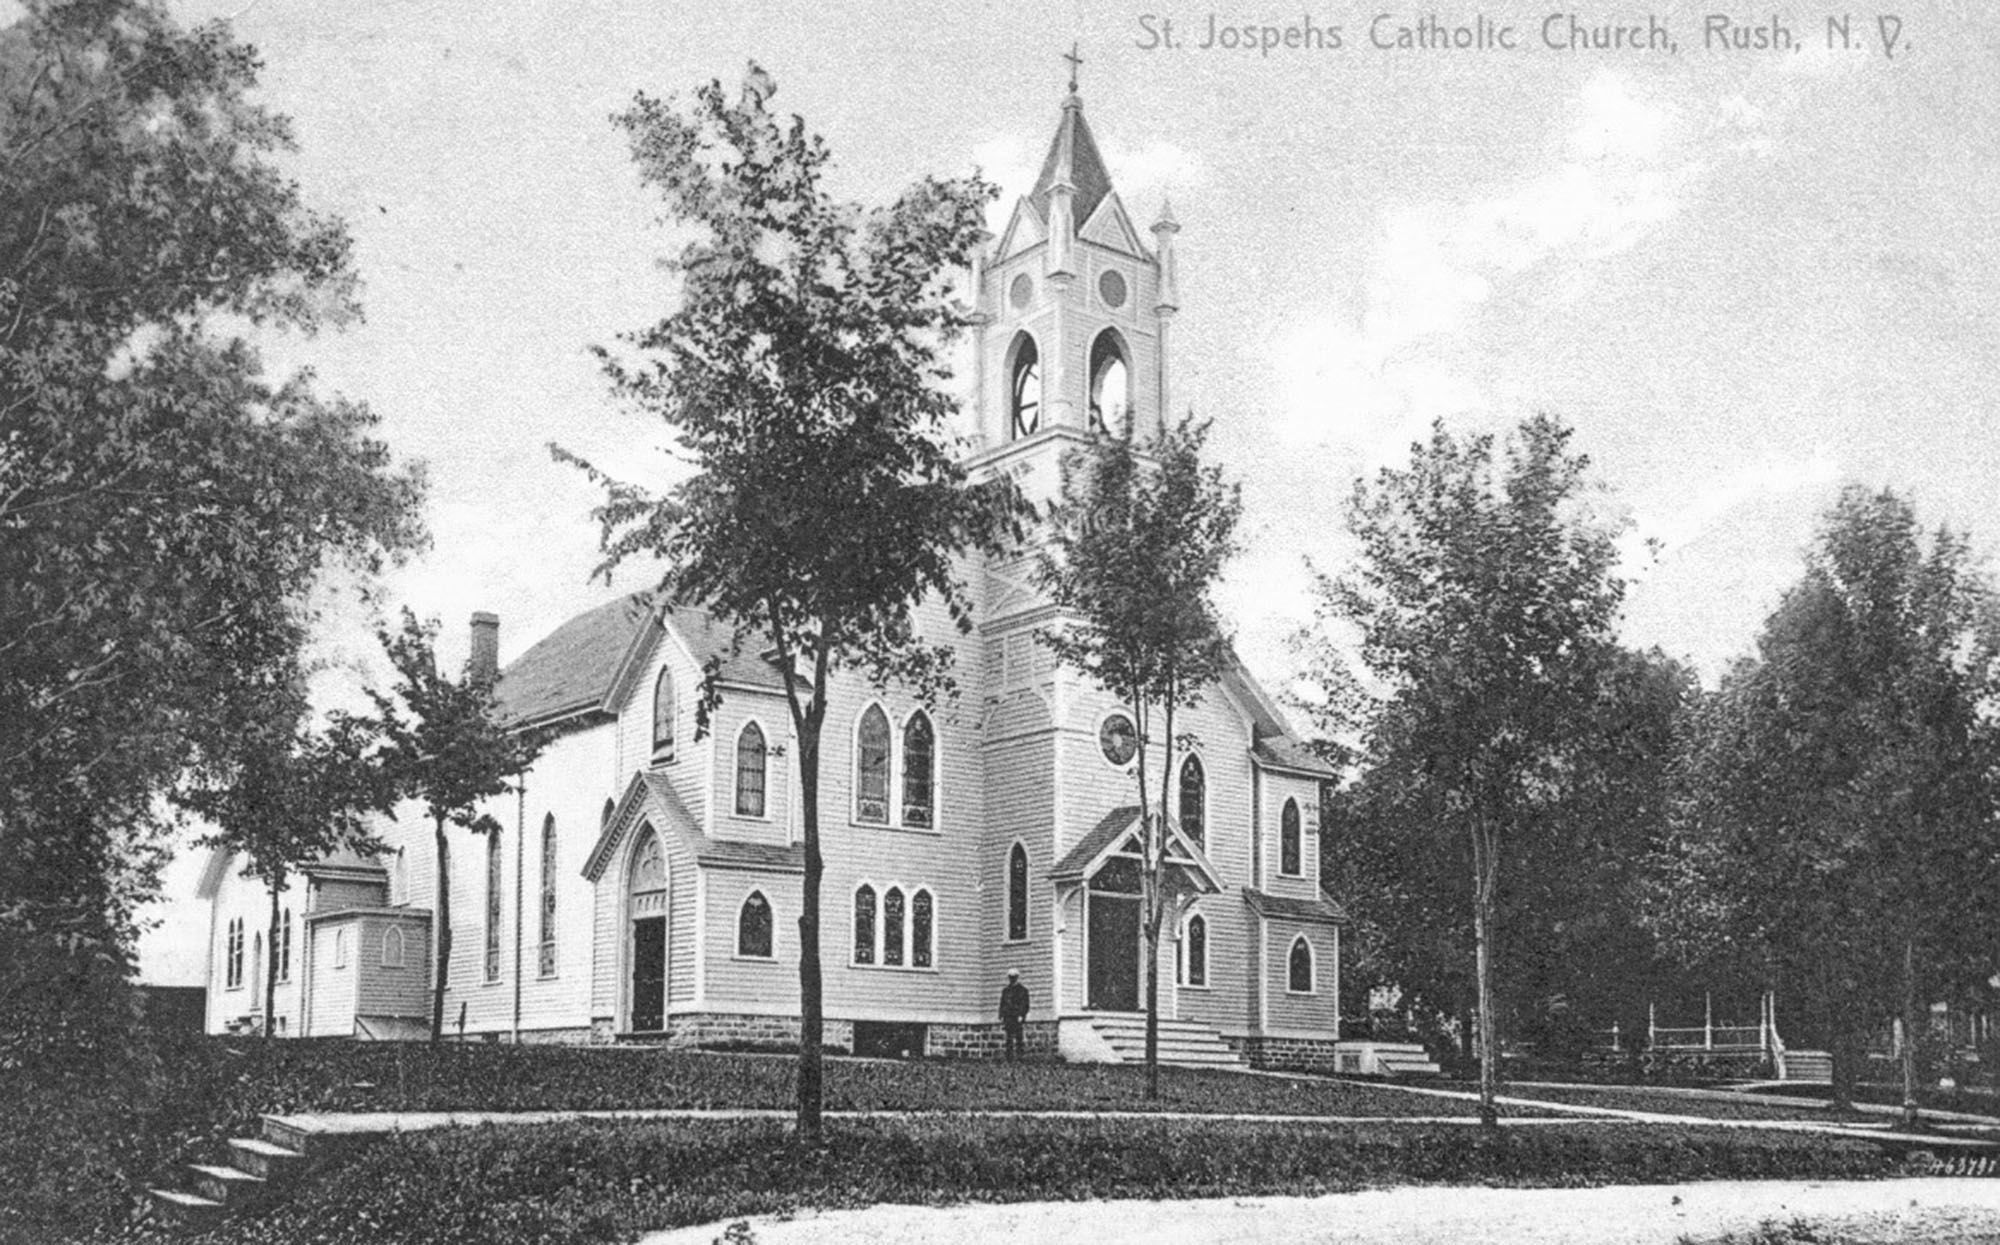 Community Forum On Future Use Of Former St. Joseph’s Church In Rush Set For April 12